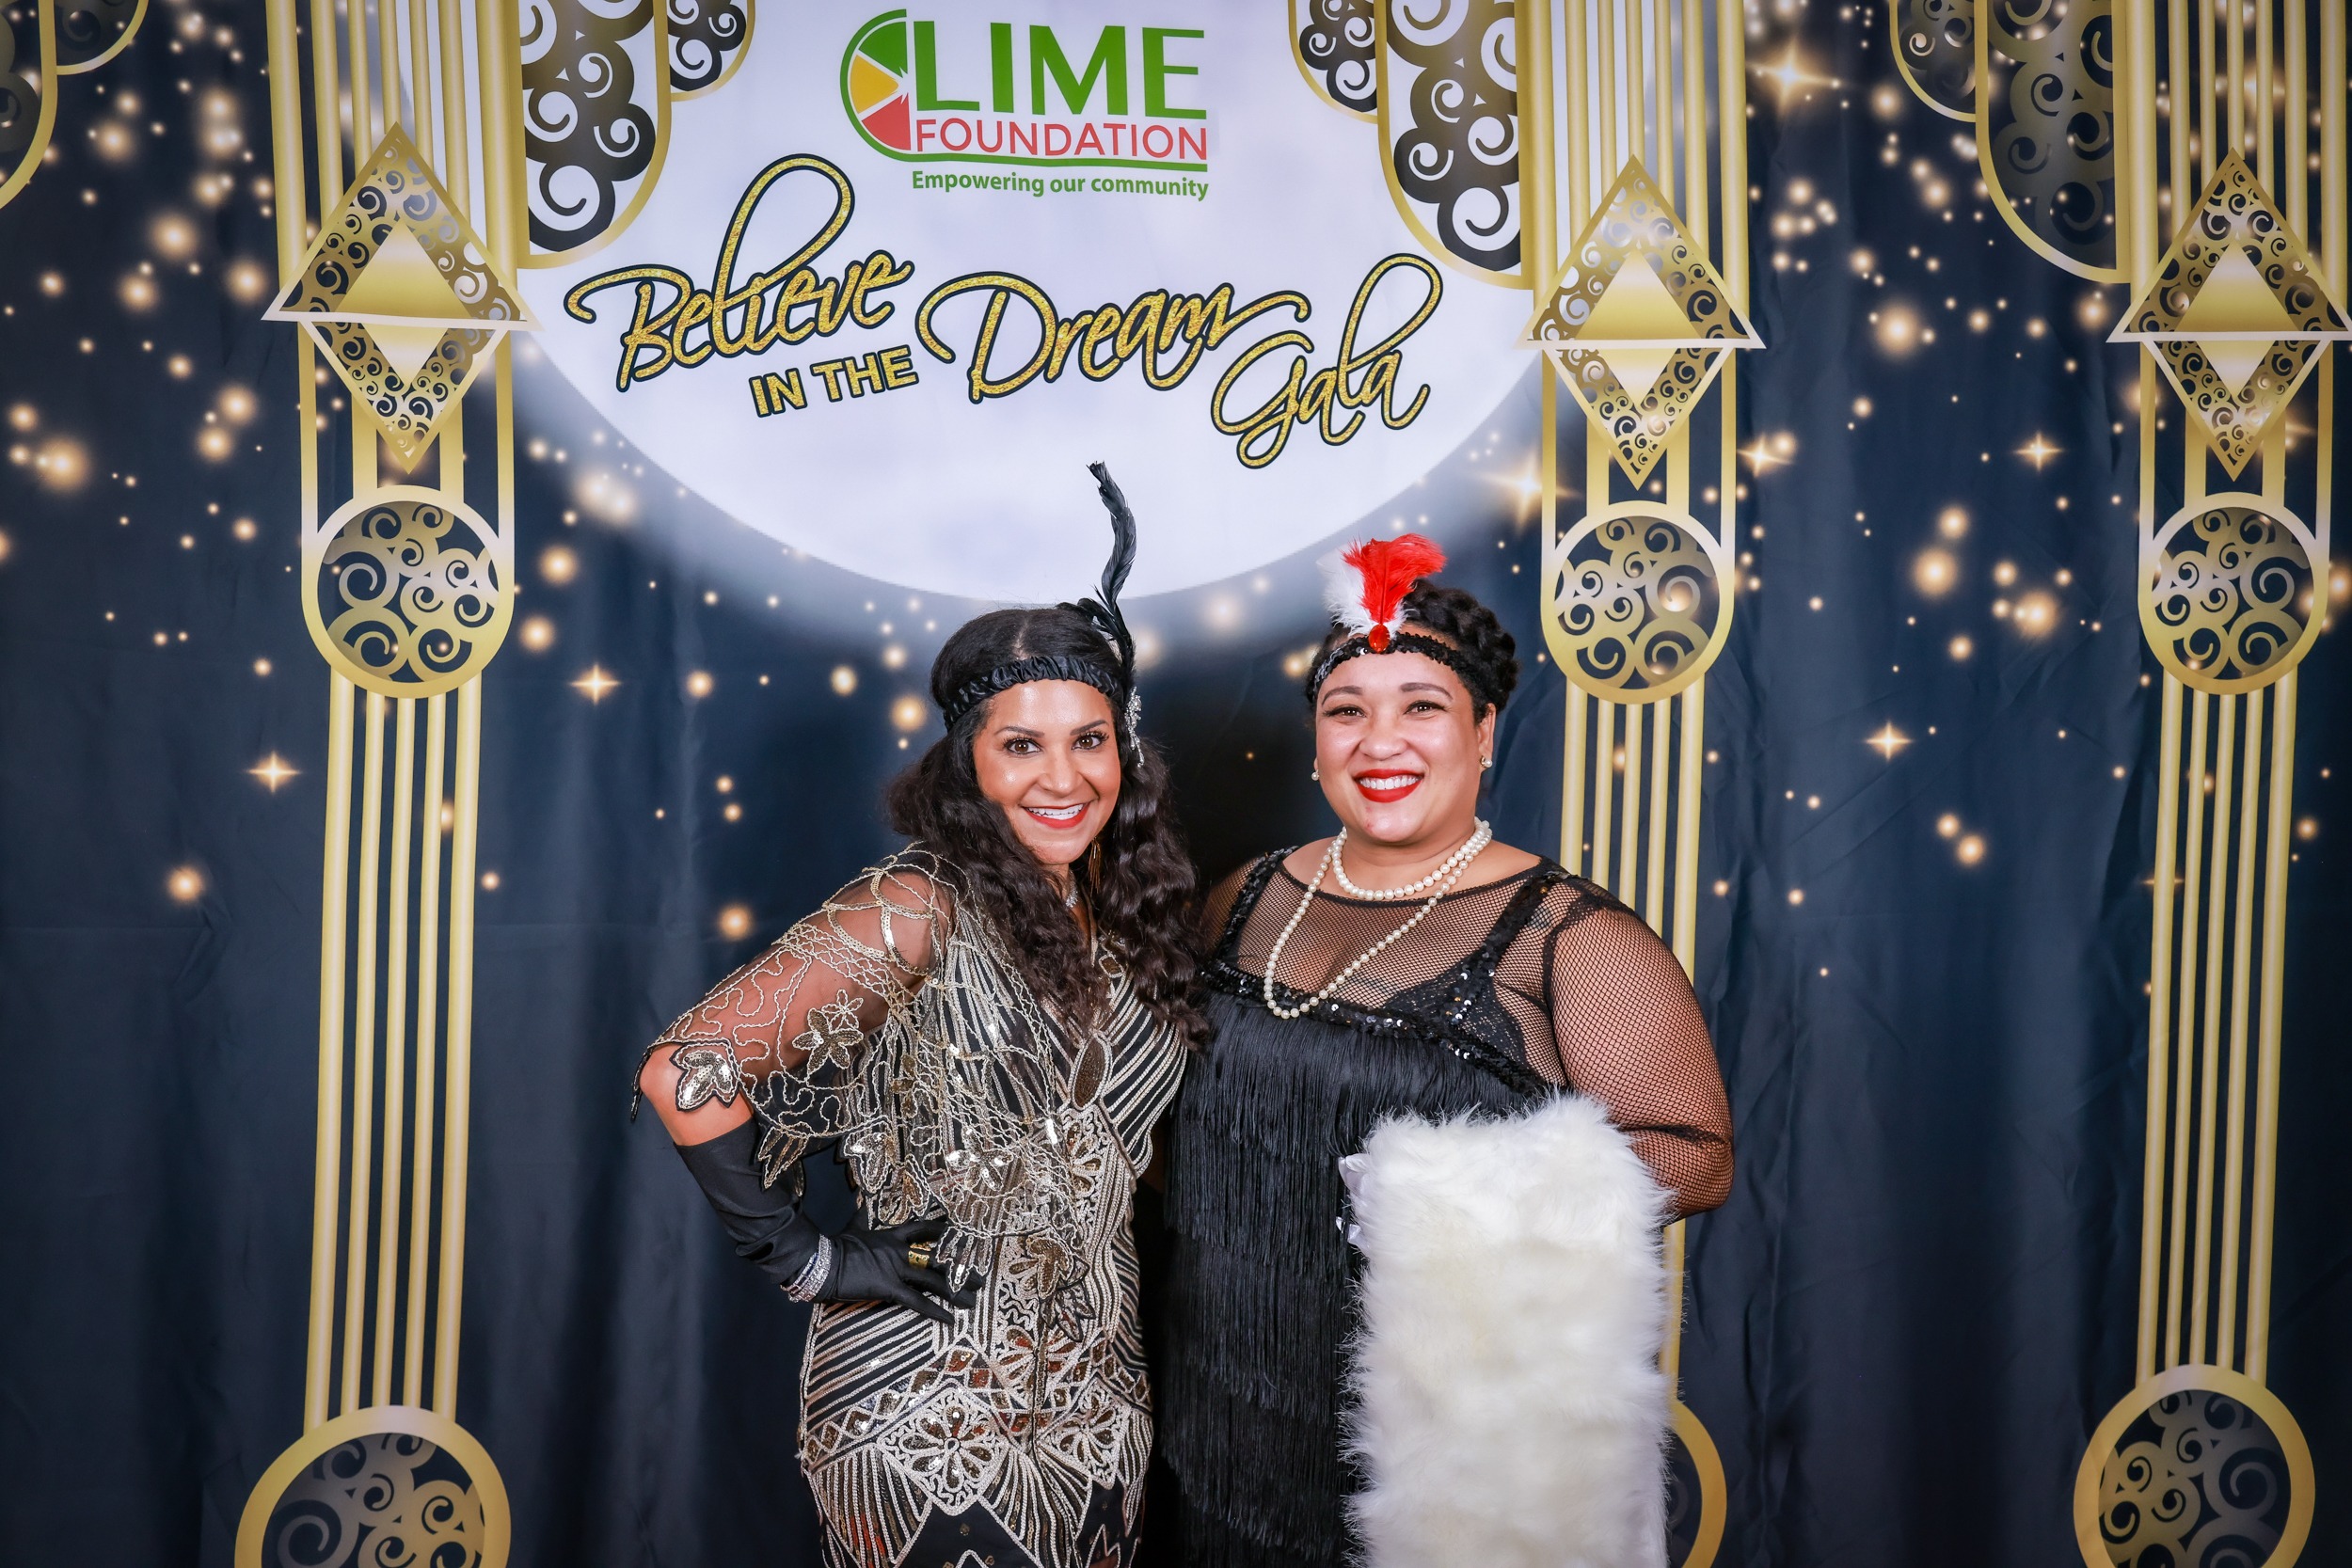 Two women striking a pose at a 1920's themed party sponsored by The LIME Foundation of Santa Rosa.